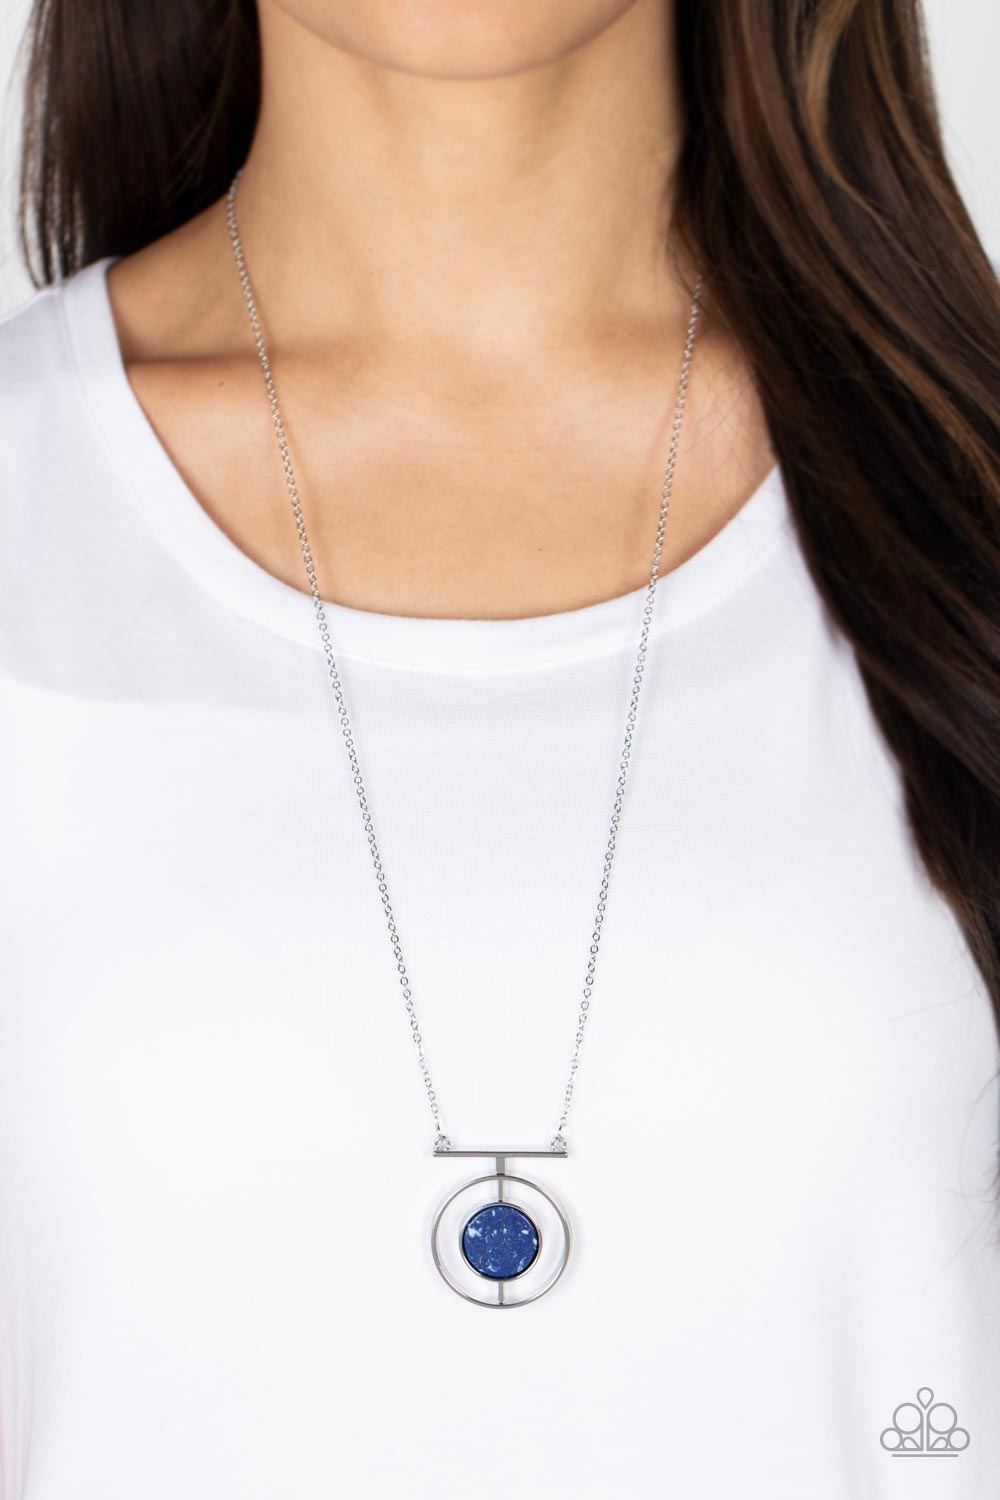 Boulevard Bazaar - Blue Speckled Stone/Silver Ring Pendant Paparazzi Necklace & matching earrings